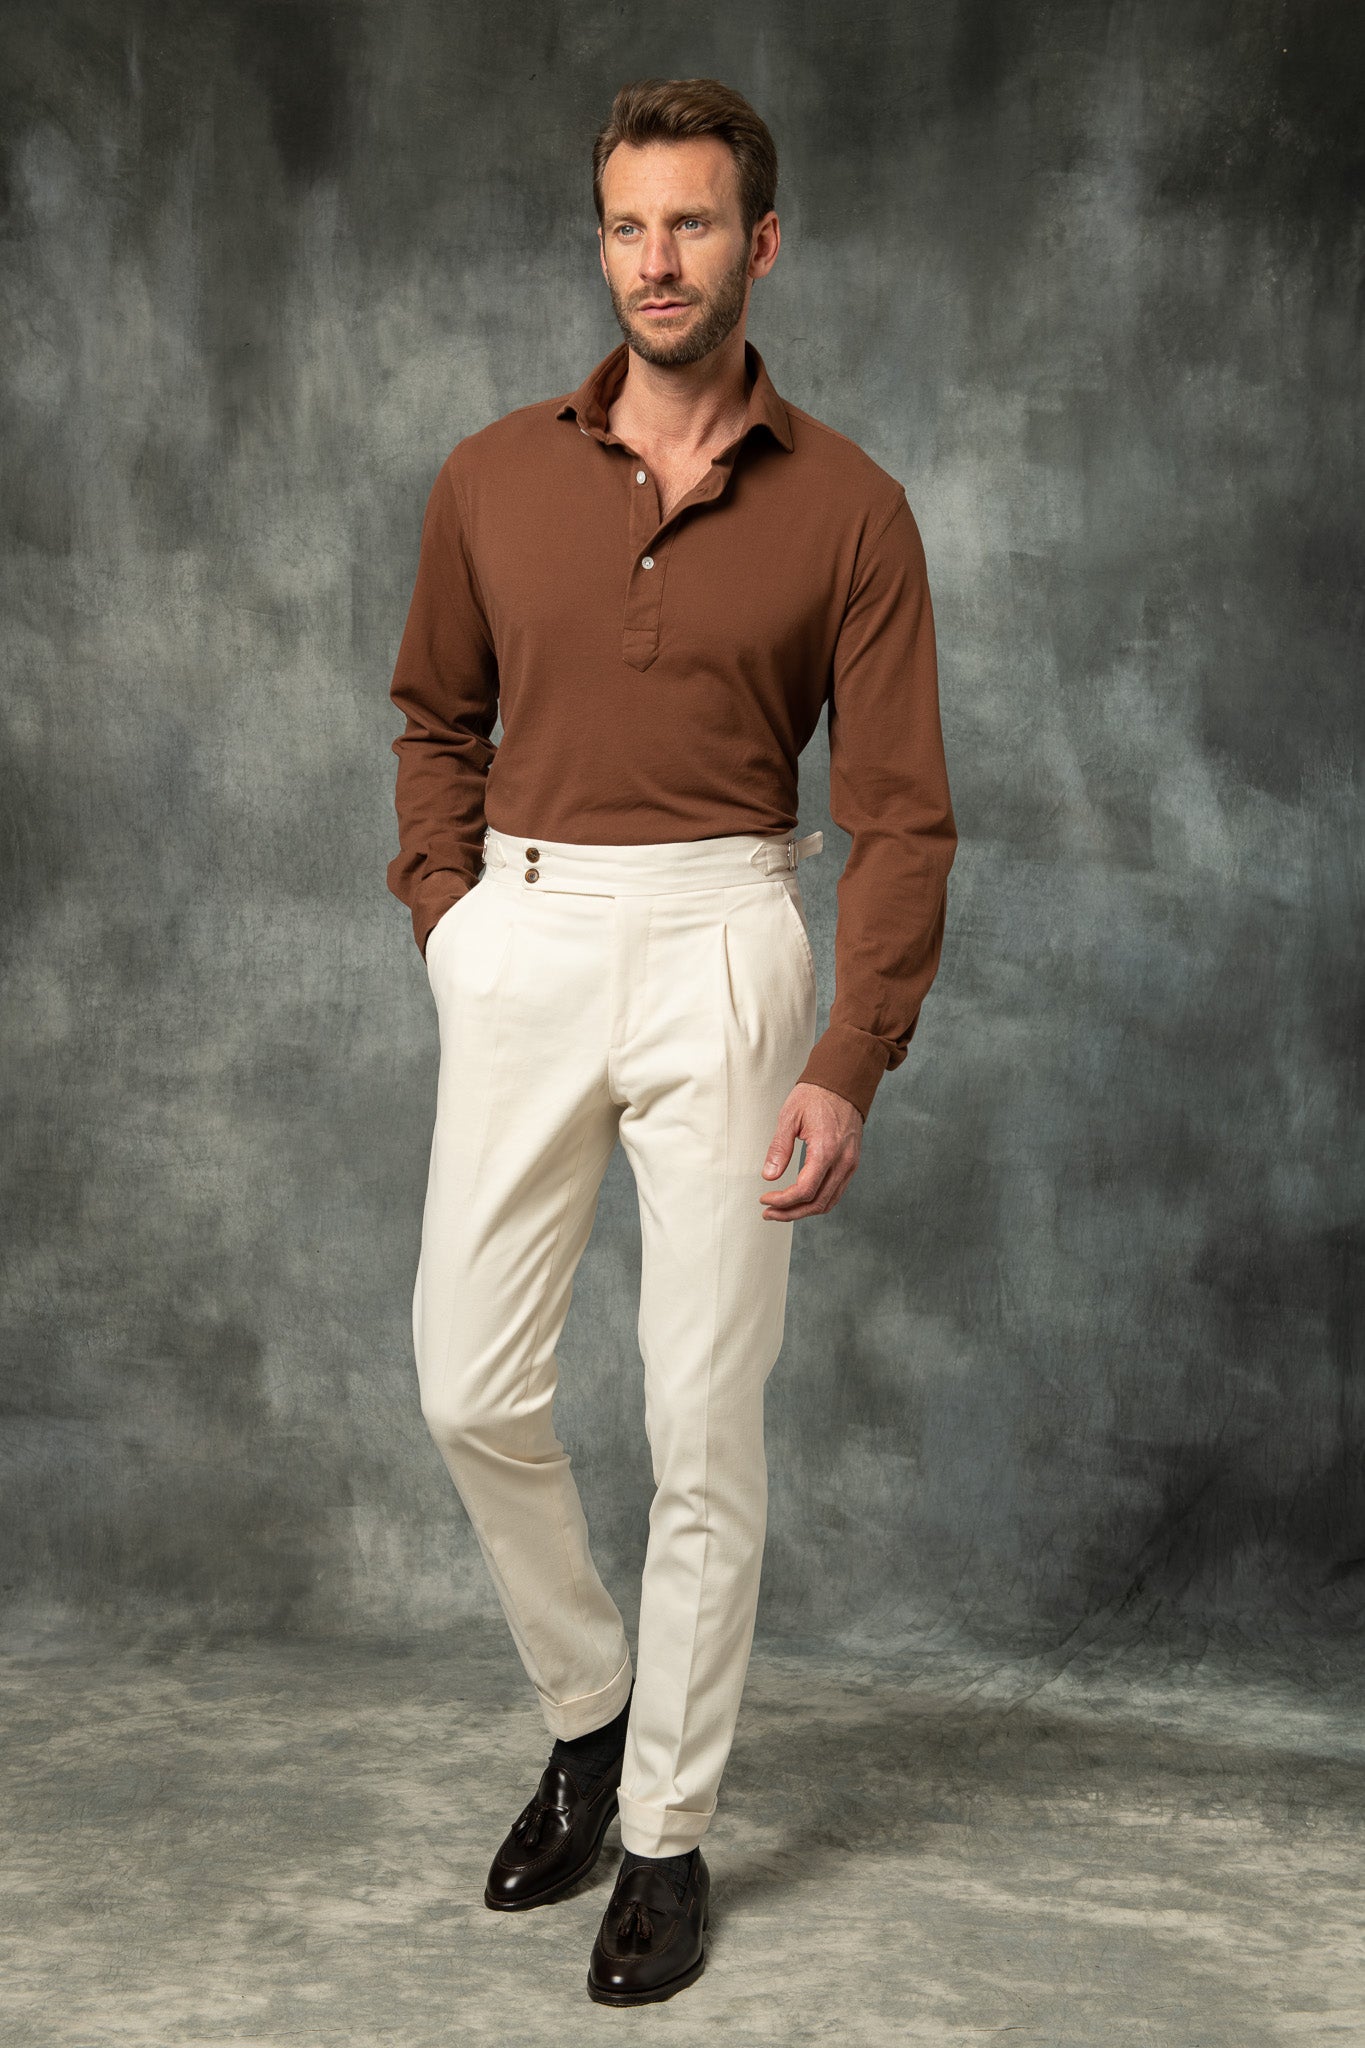 What Color Shirt Goes With Brown Pants? (Pics) • Ready Sleek